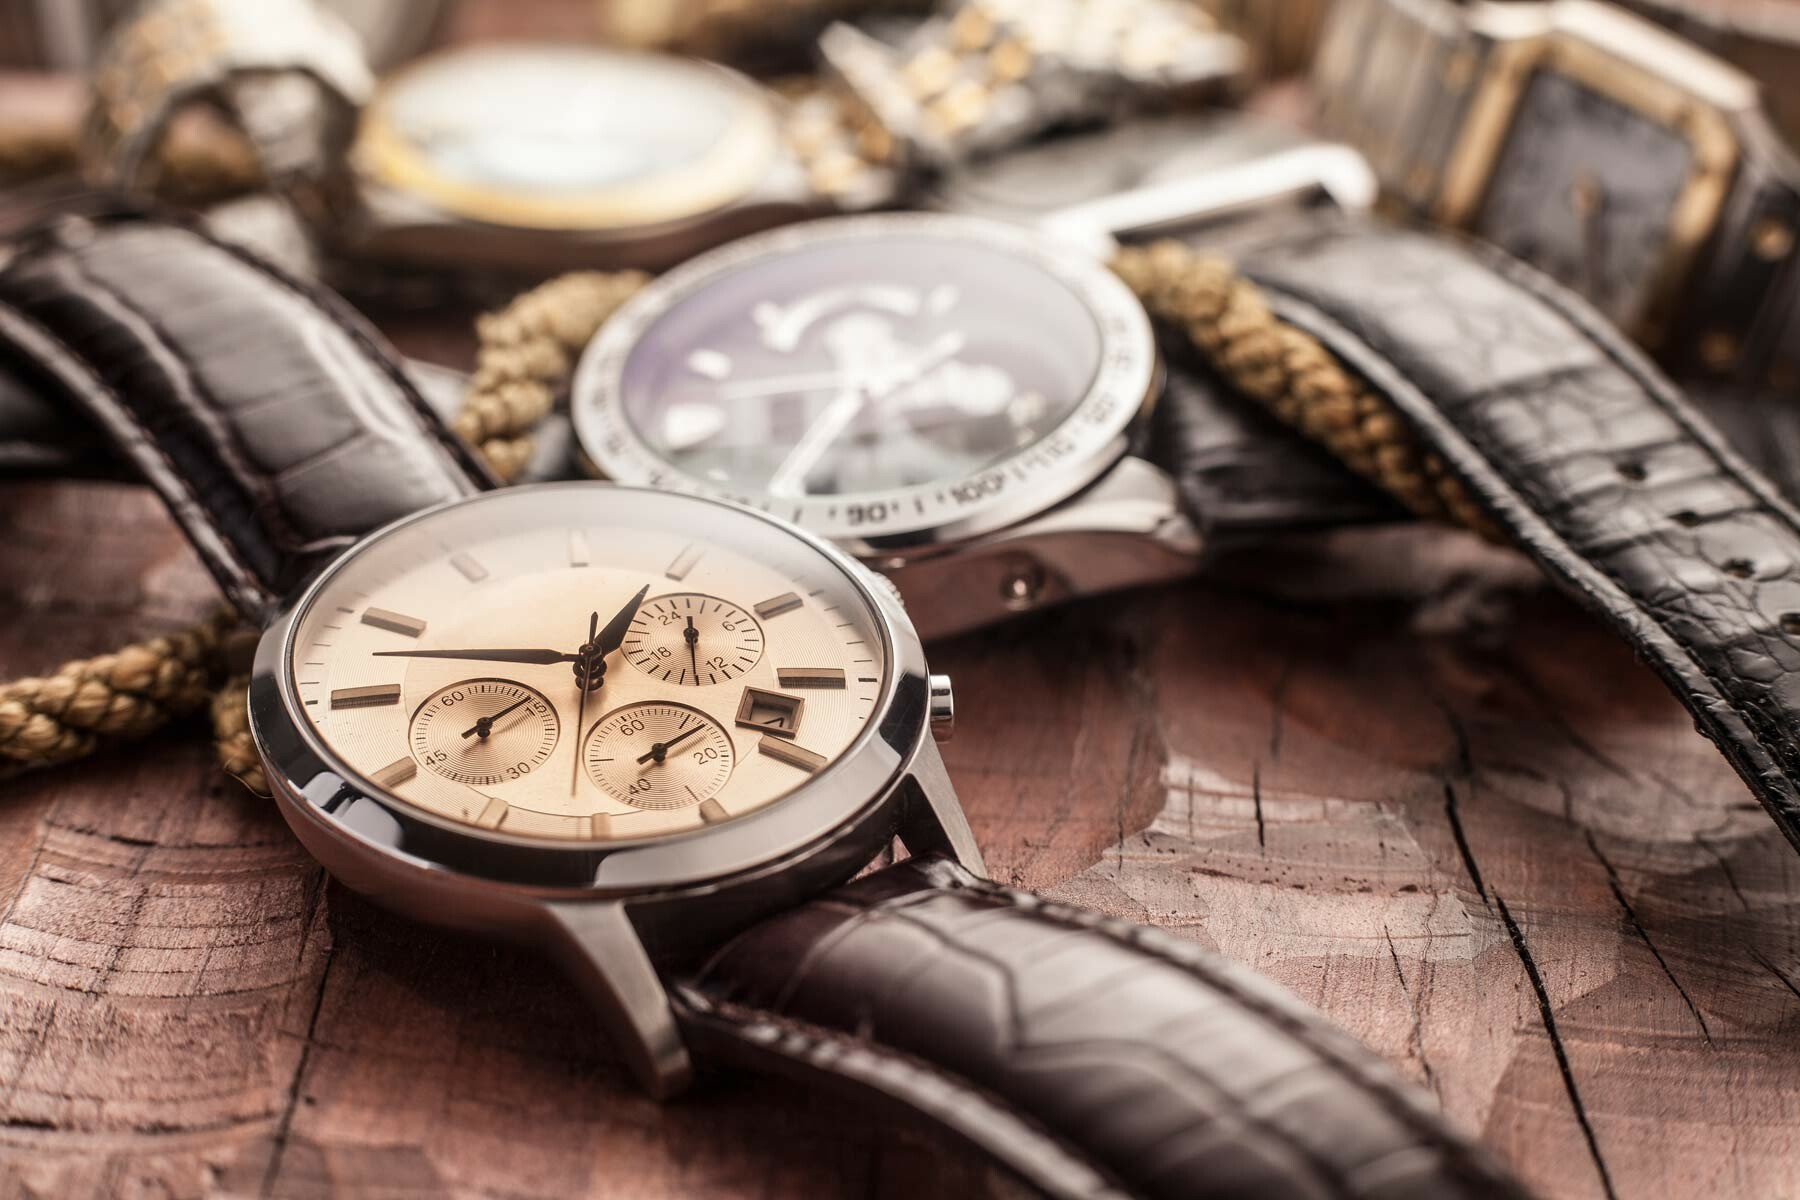 Classic watches with leather straps.